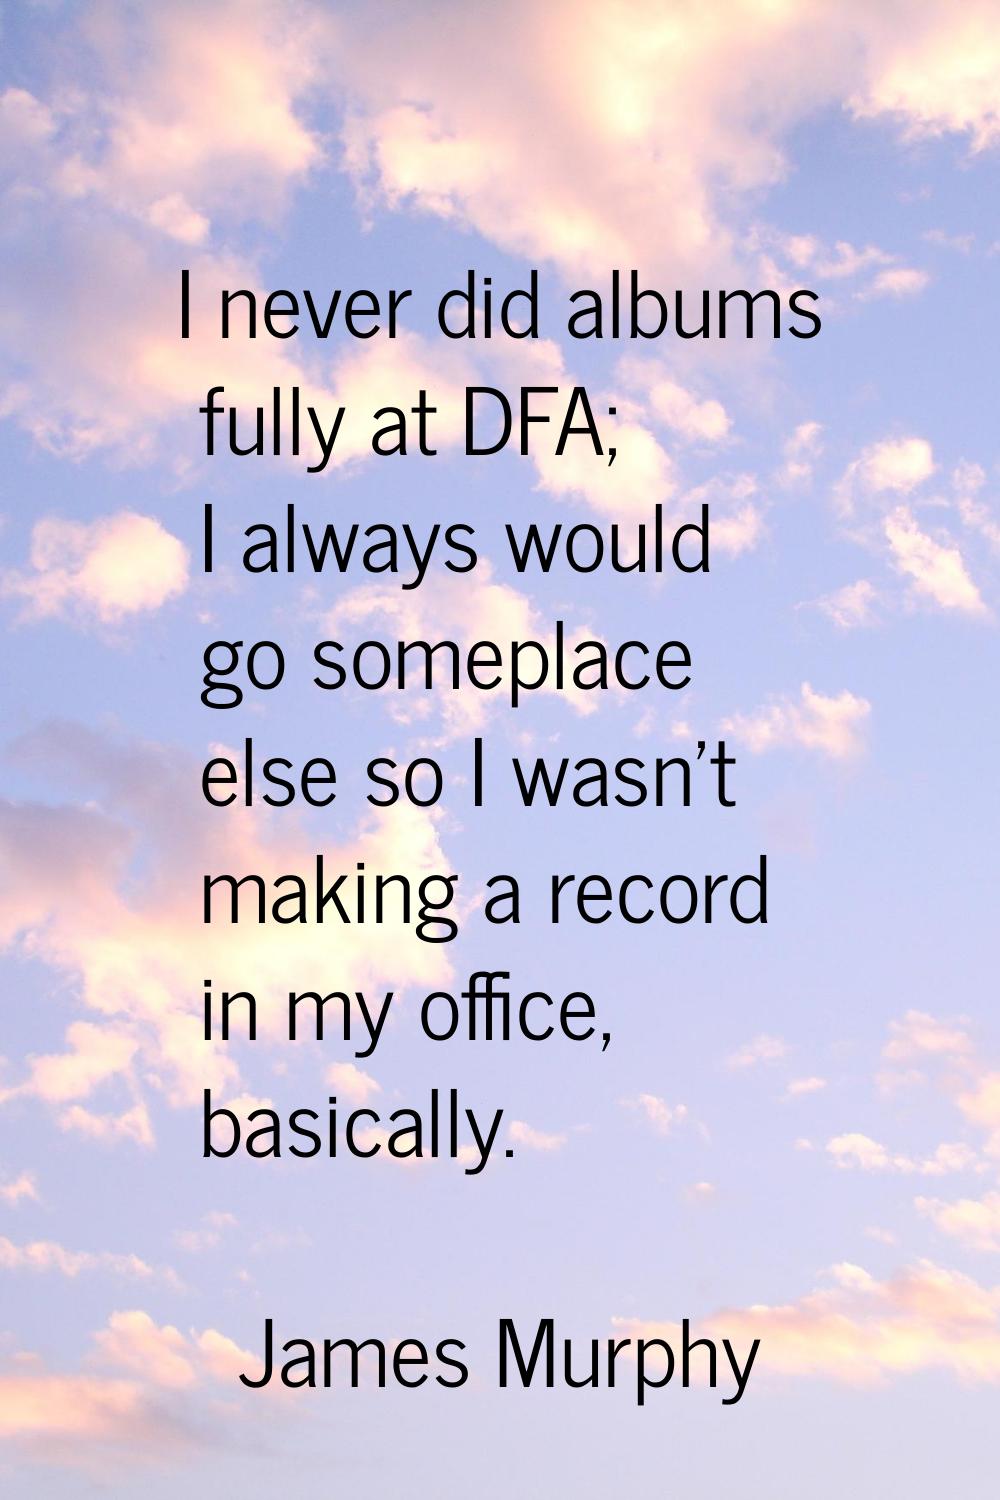 I never did albums fully at DFA; I always would go someplace else so I wasn't making a record in my